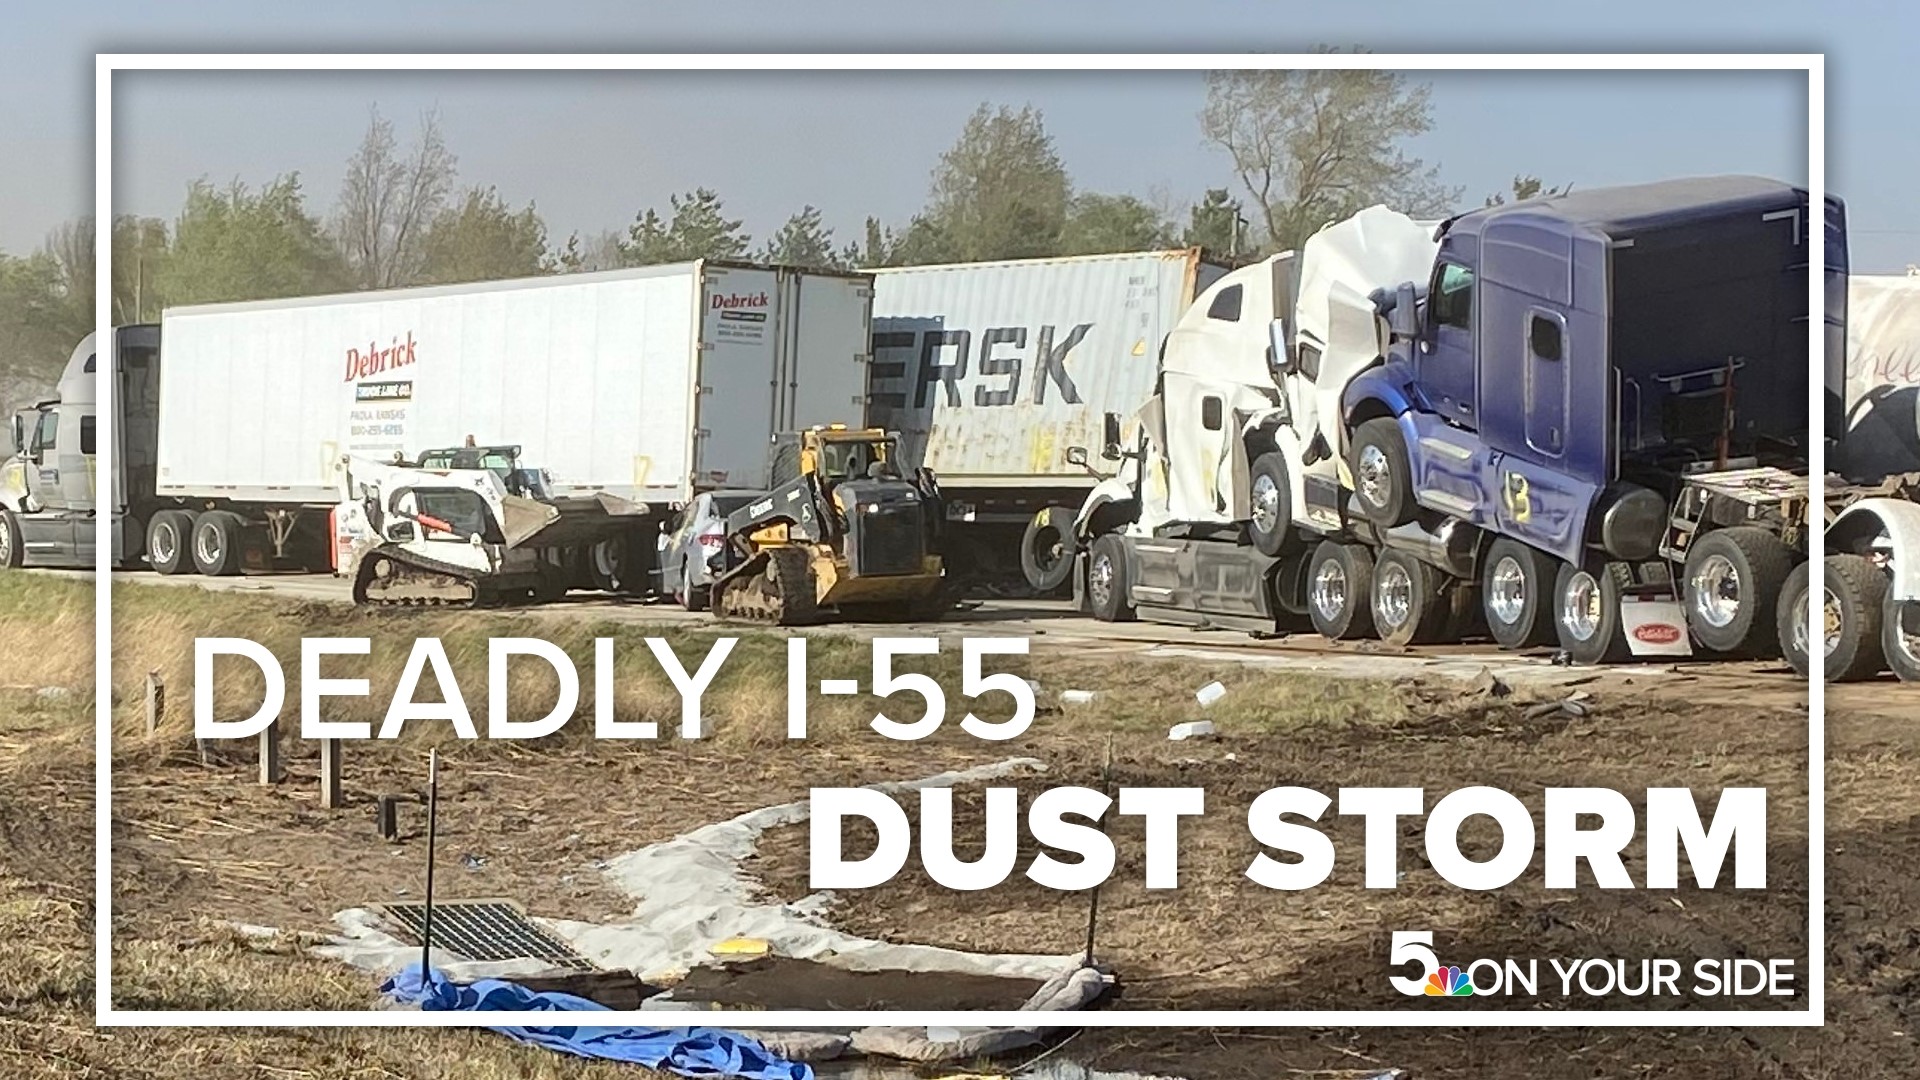 Two people remained unidentified as of Tuesday morning. Authorities said blowing dust from nearby caused "complete blackout conditions," resulting in the pileup.